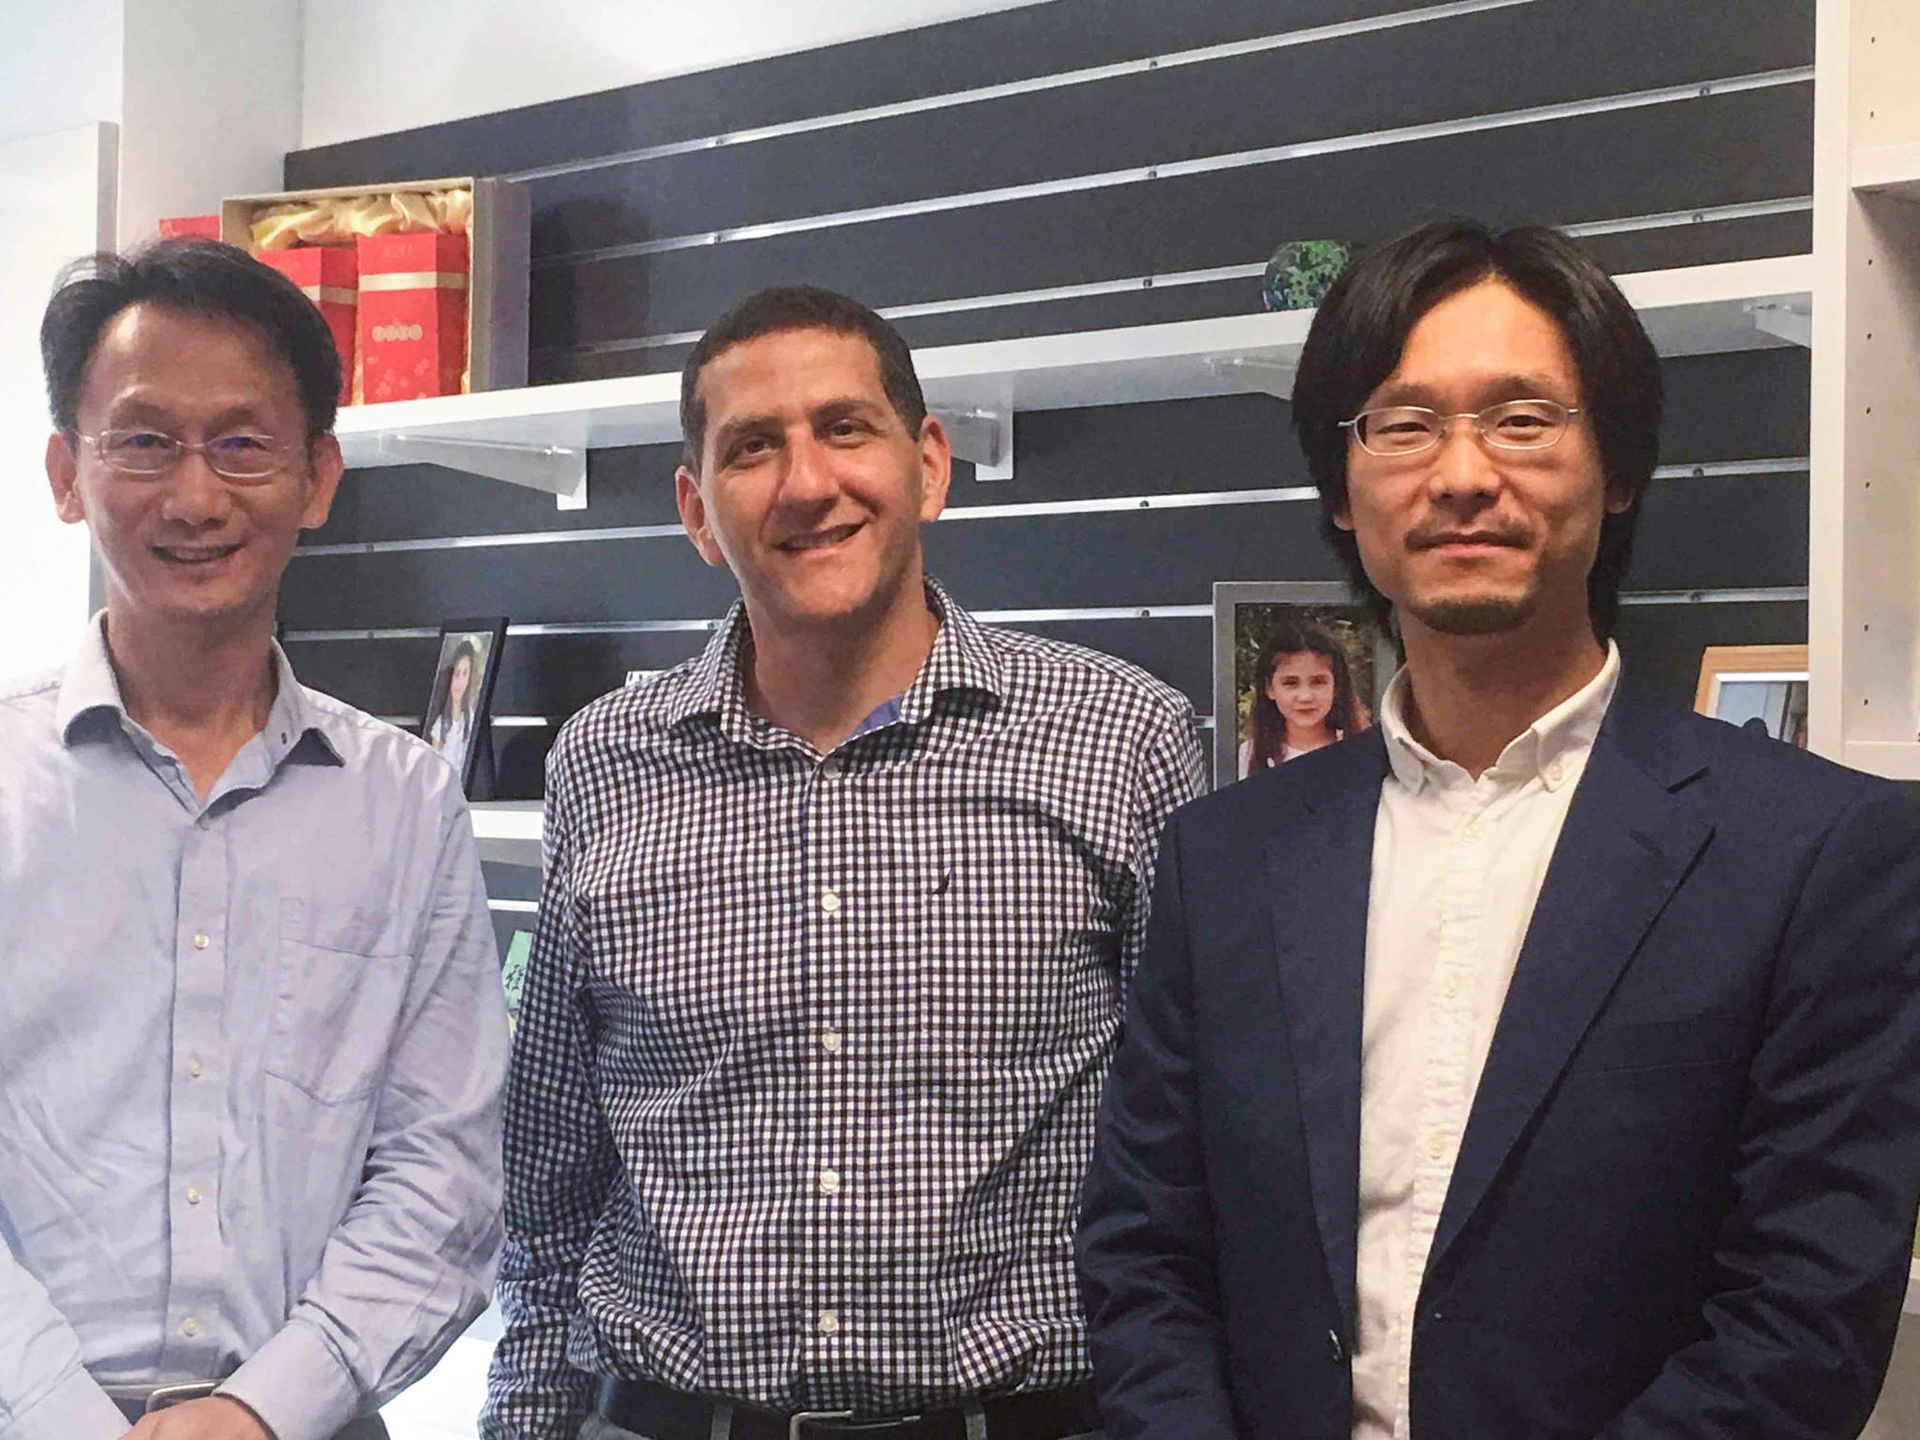 Professor Huang’s doctoral advisor visited Sydney in 2017, and it was the happiest thing for Professor Huang to have his family and friends together in a foreign country.